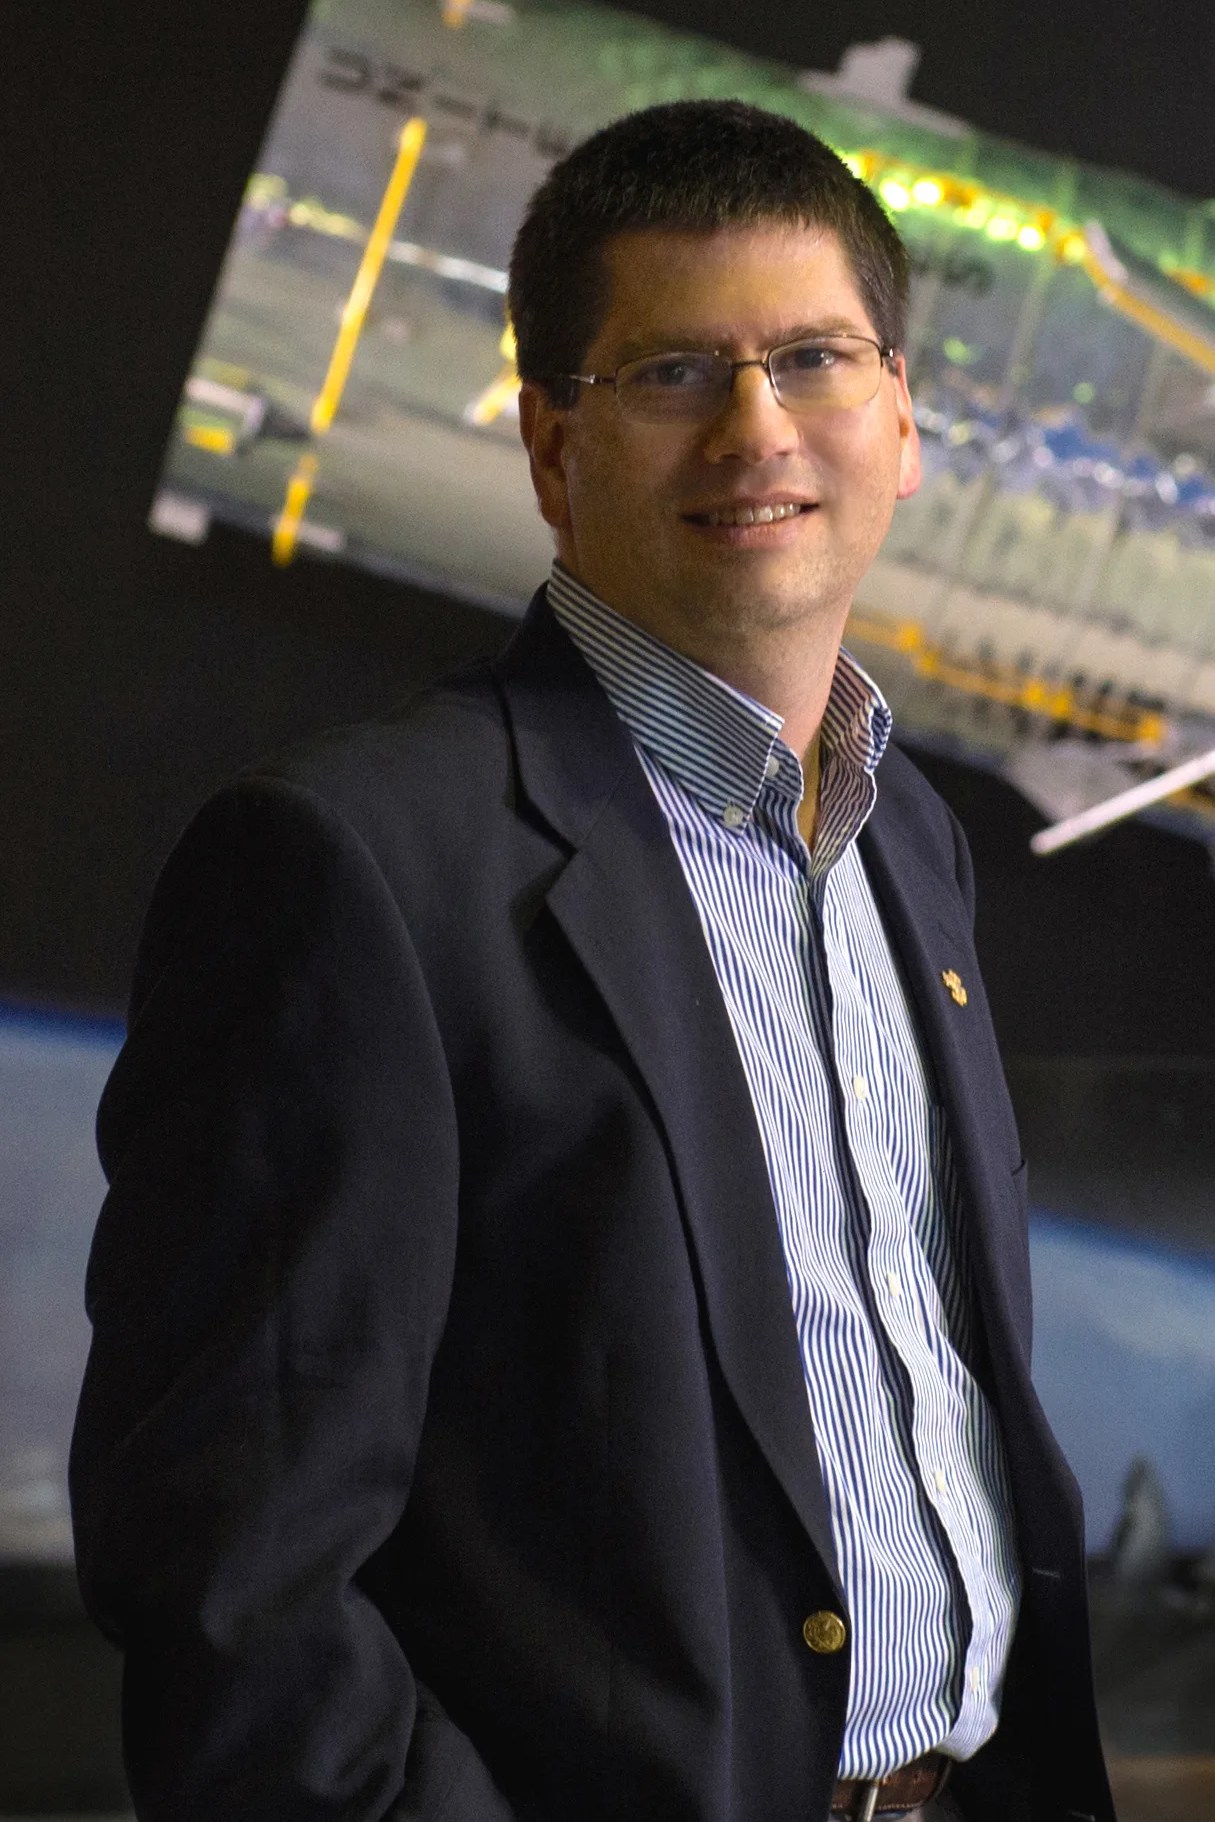 Hubble Project Manager Patrick Crouse